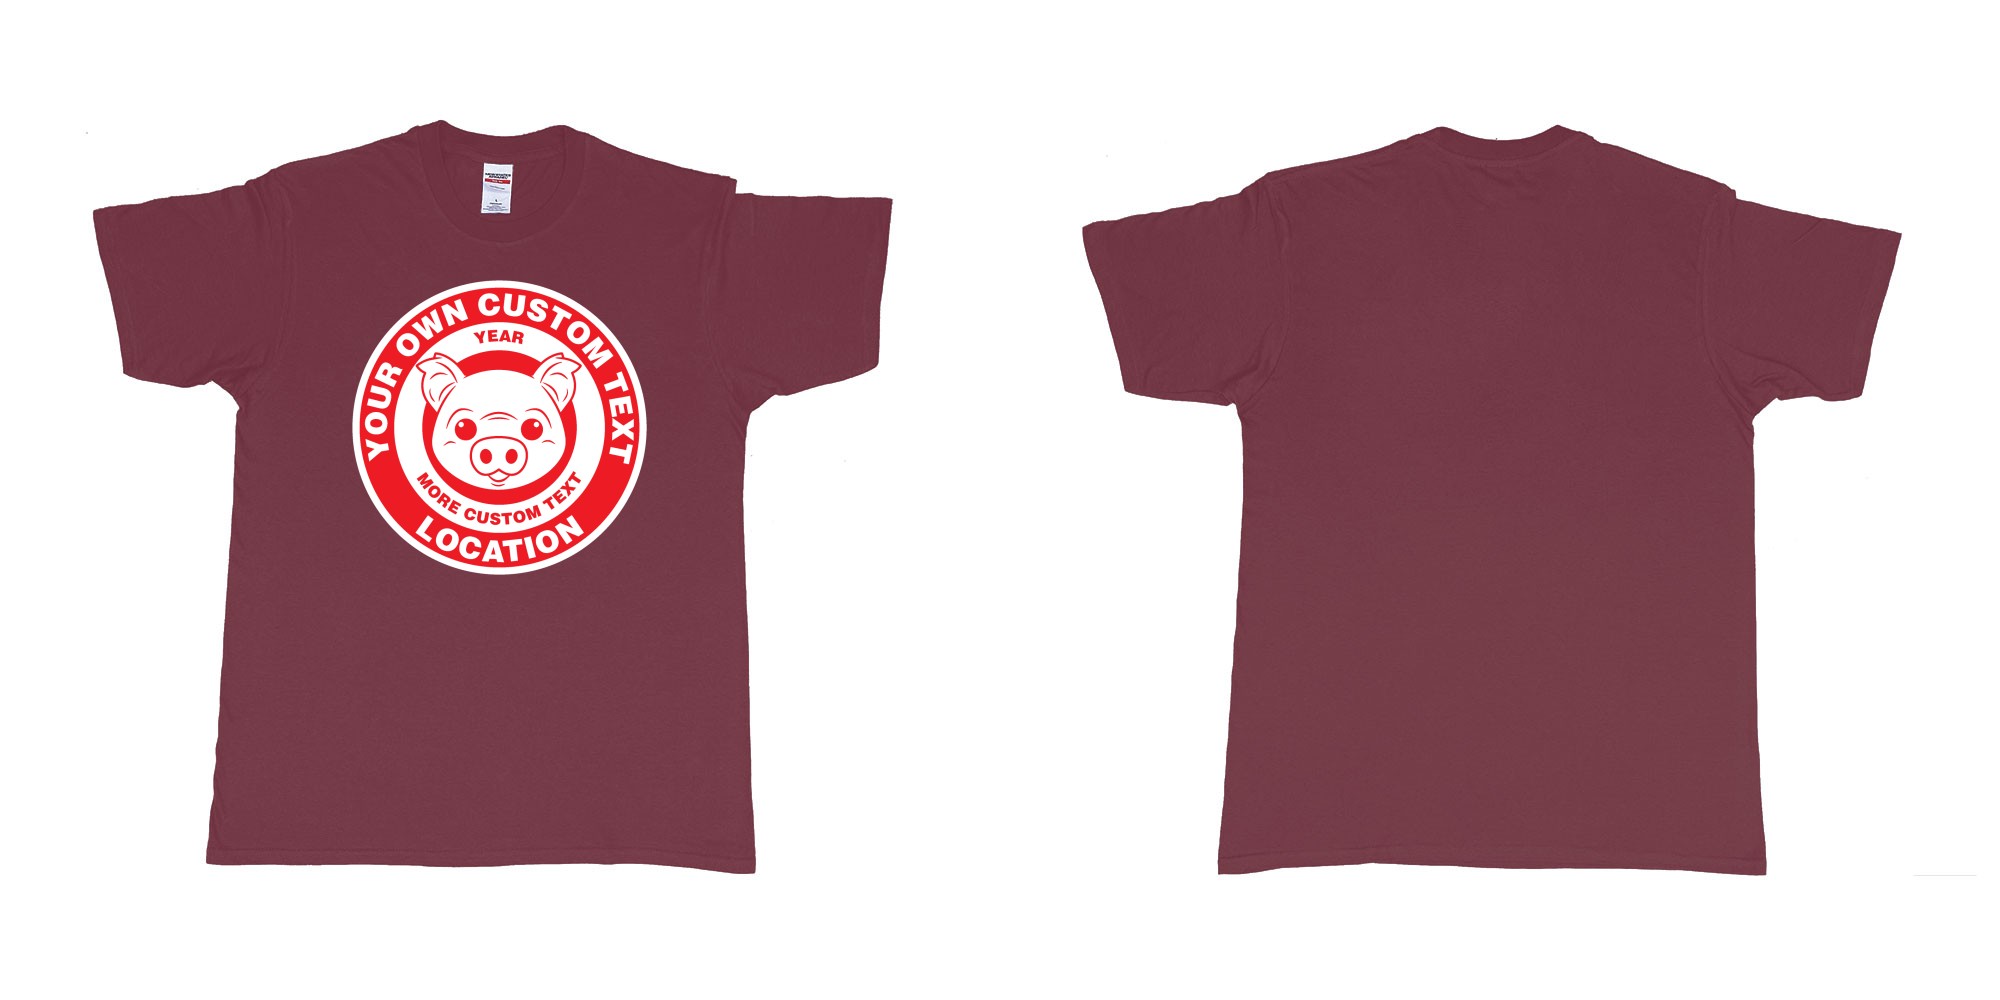 Custom tshirt design little piggy target in fabric color marron choice your own text made in Bali by The Pirate Way